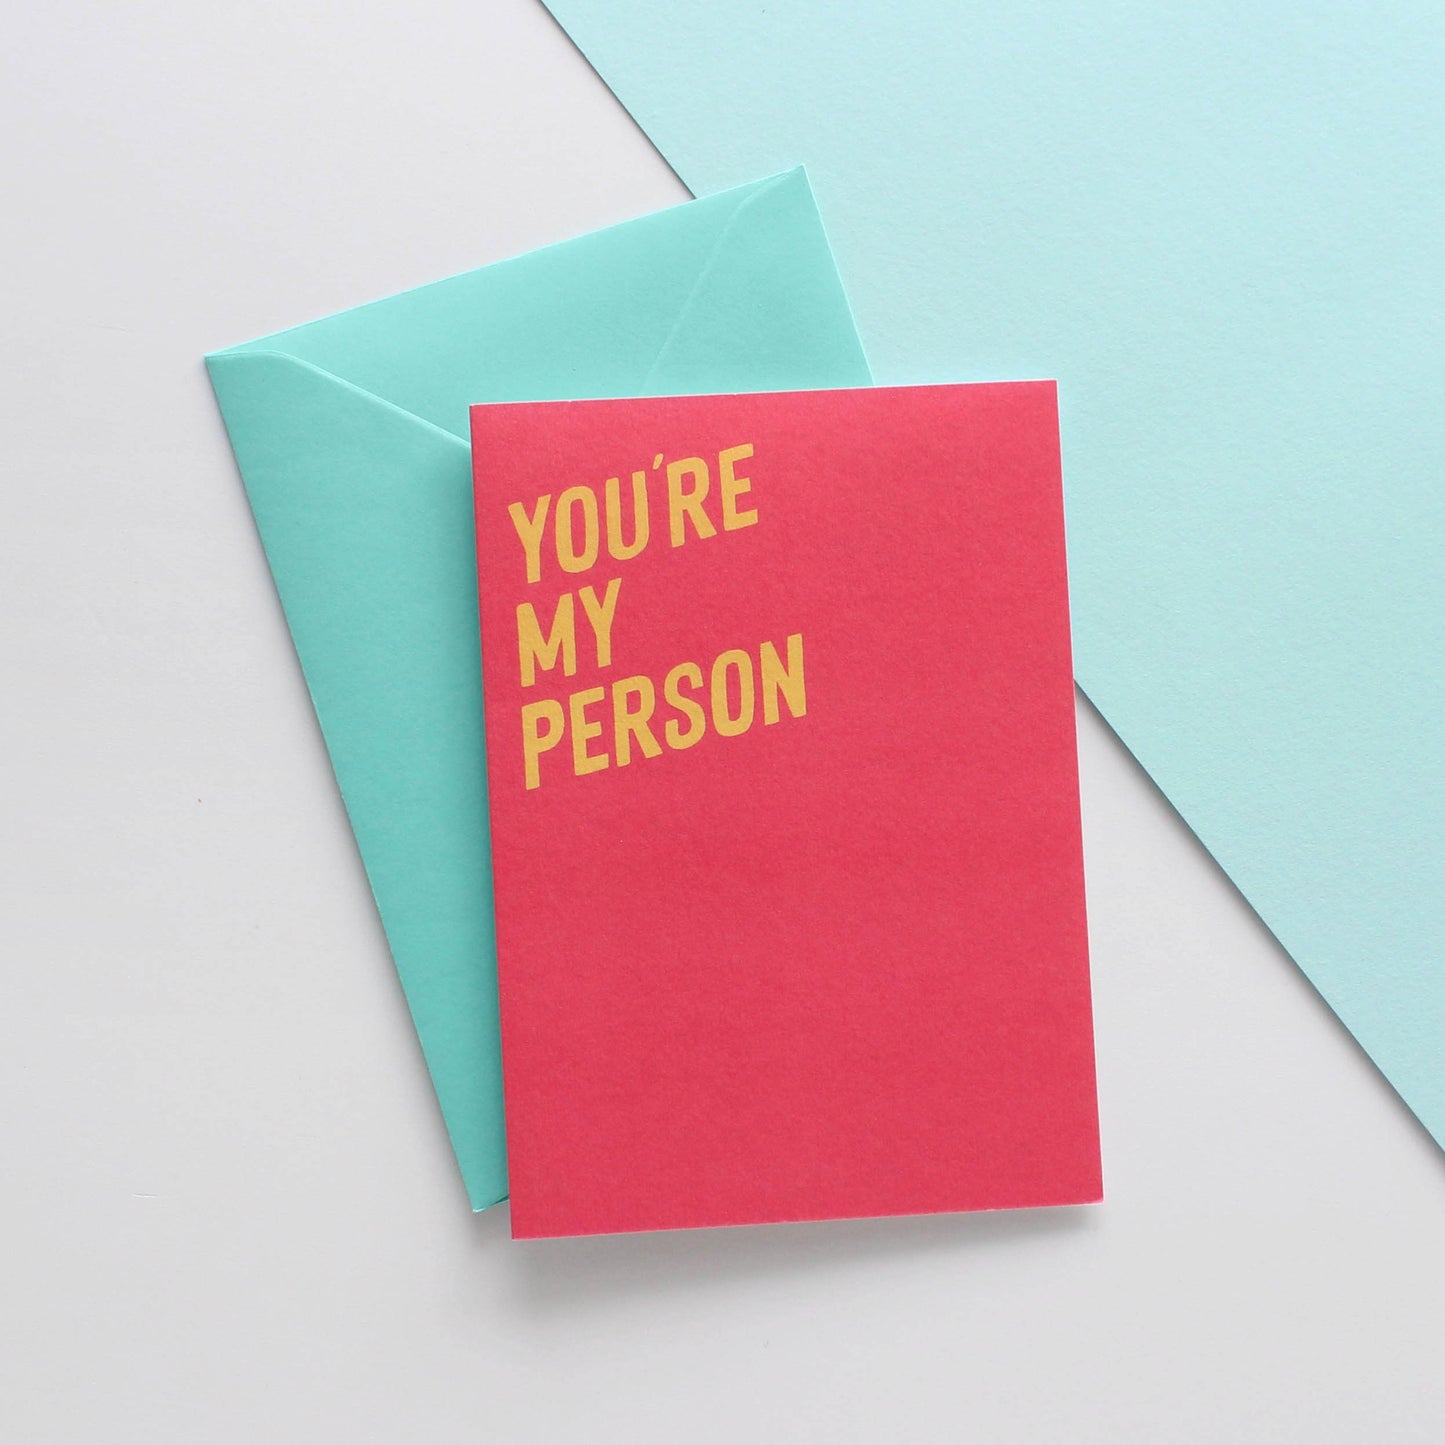 You're my person card from Purple Tree Designs